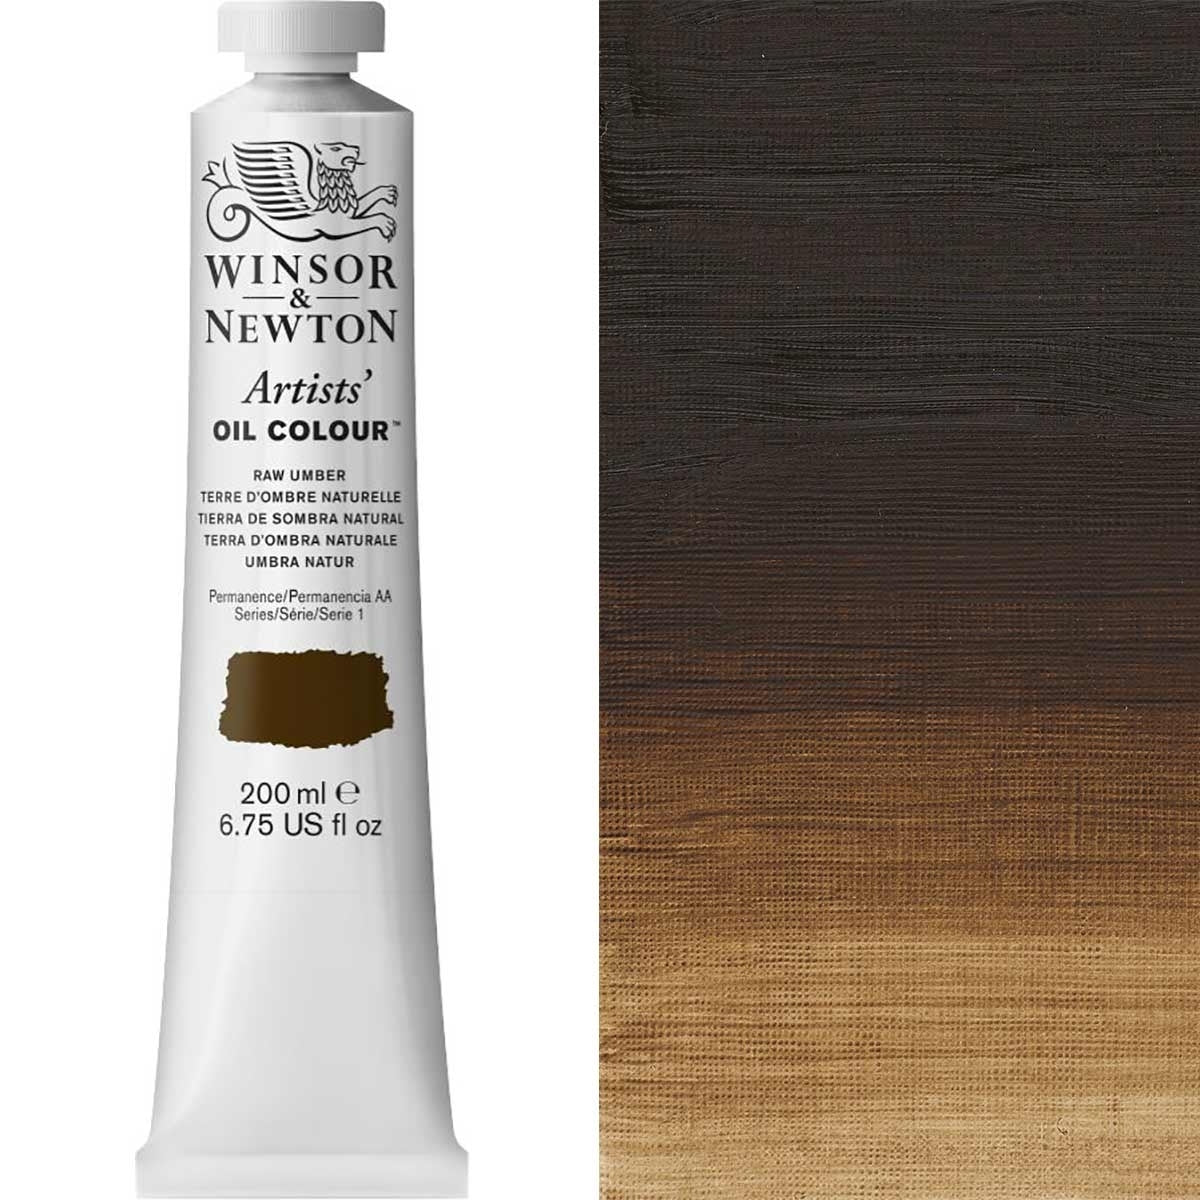 Winsor and Newton - Artists' Oil Colour - 200ml - Raw Umber